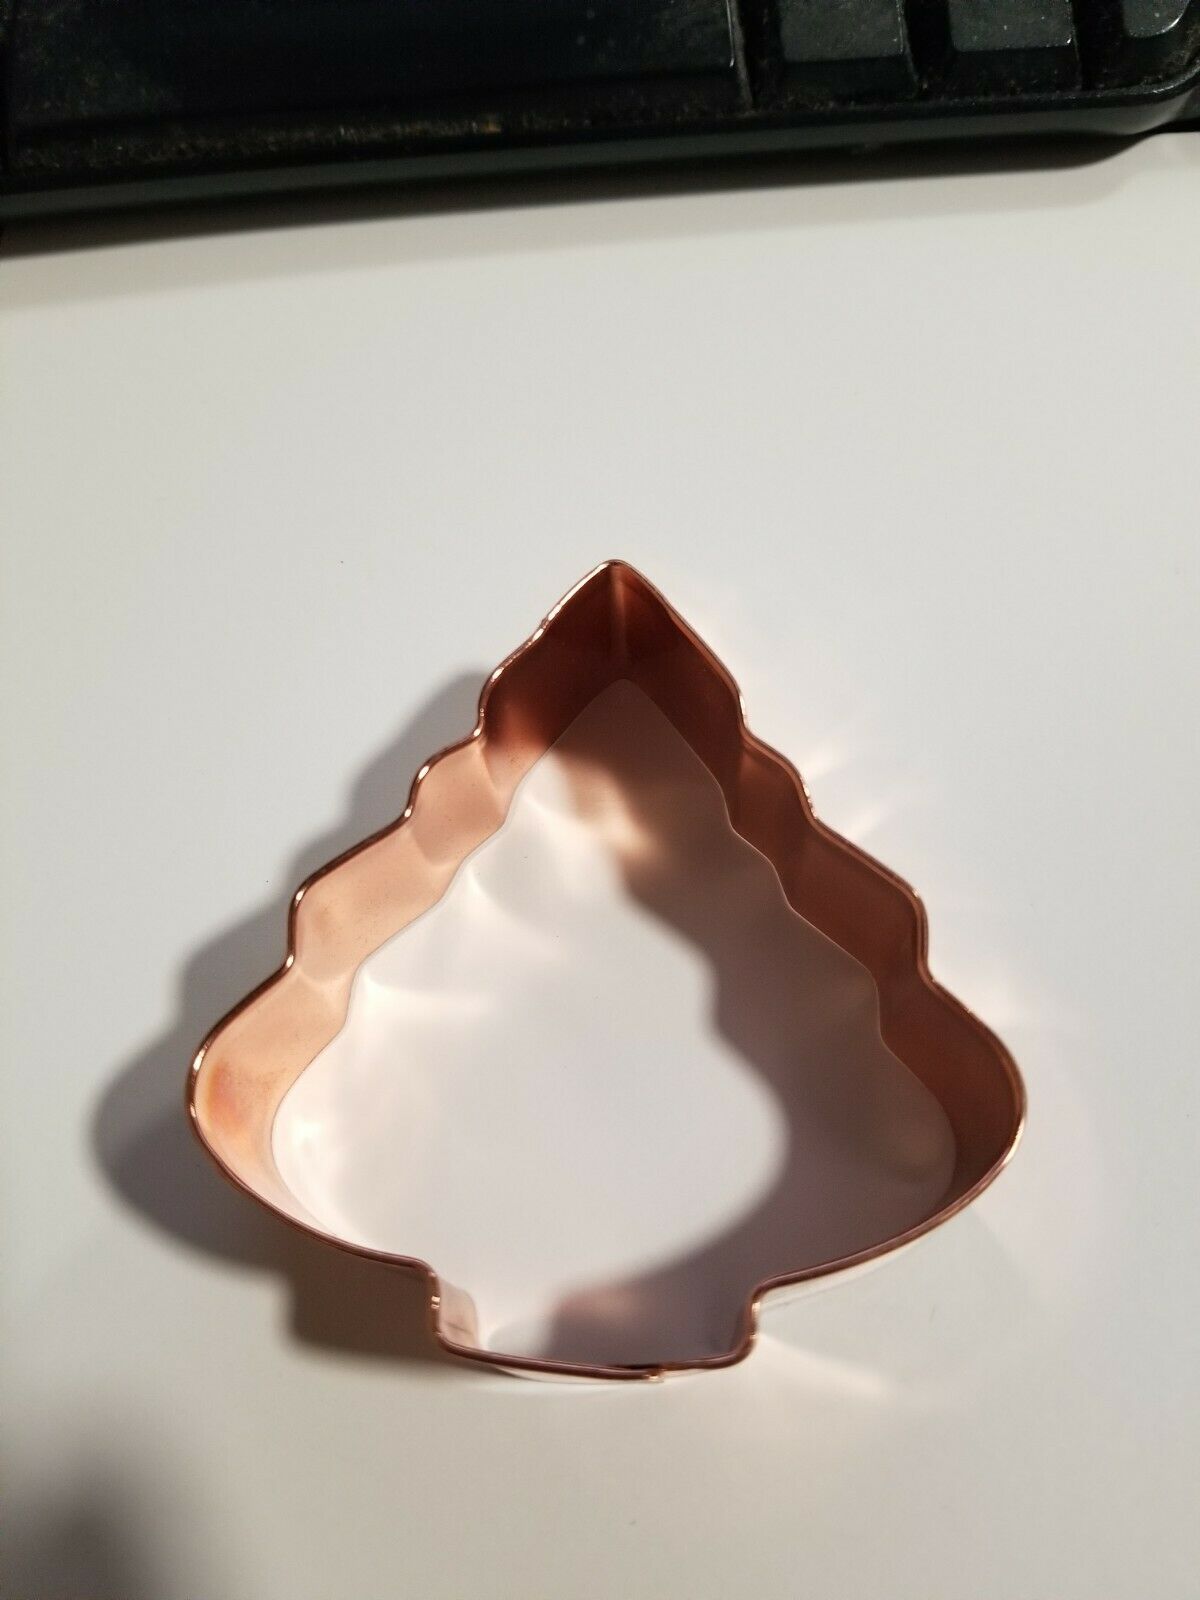 Primary image for Never Used - Crate And Barrel Copper Cookie Cutter - Christmas Tree Balsam 3"